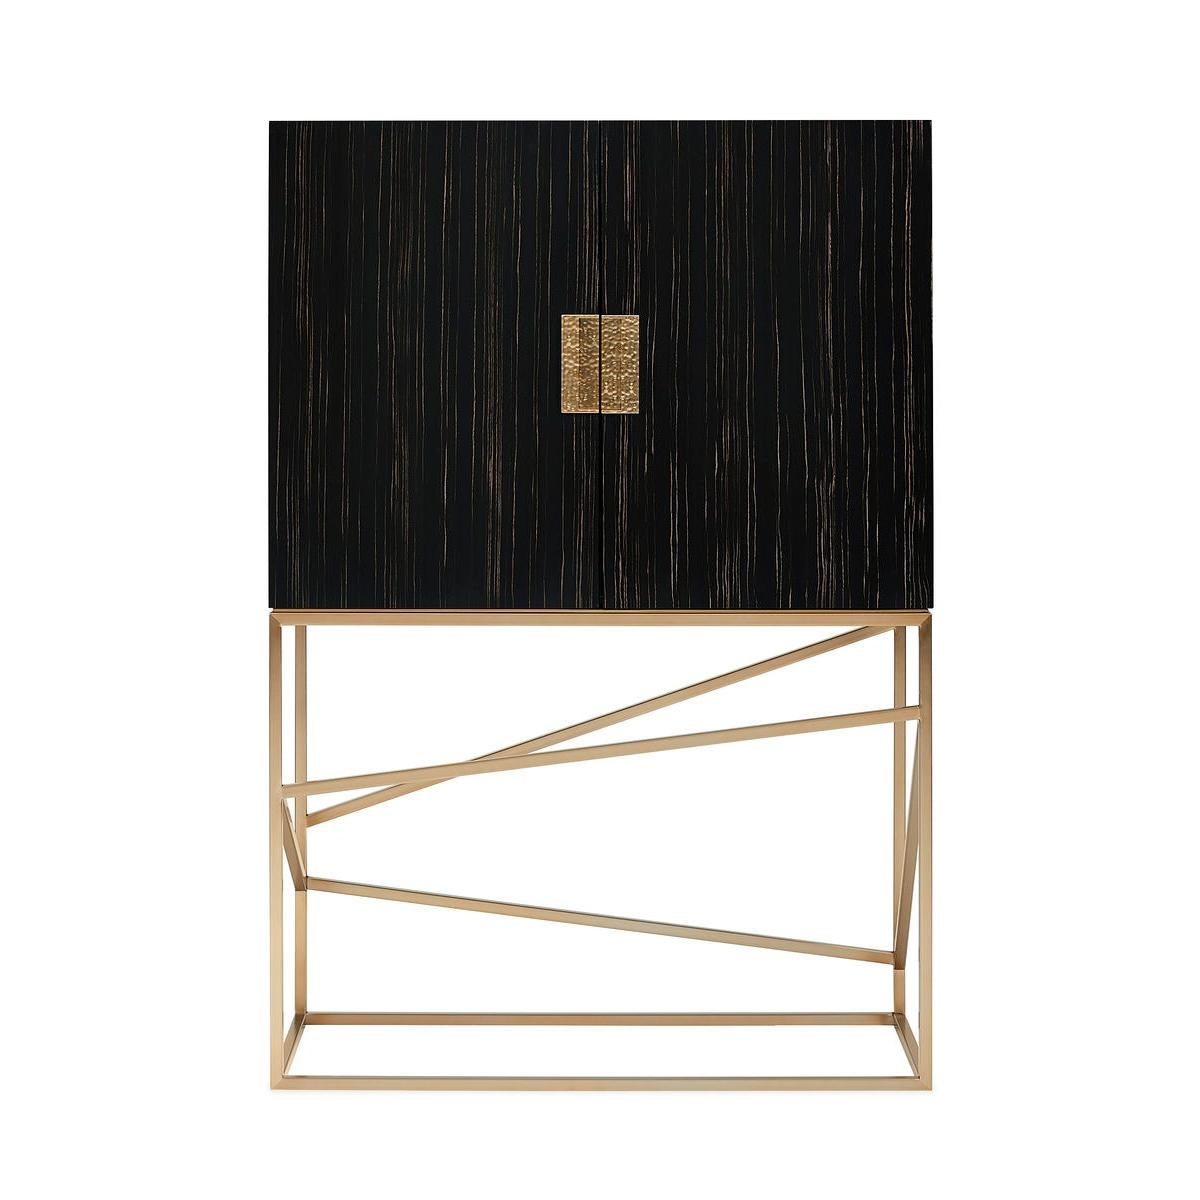 Mid Century style bar cabinet, finished in striated Ebony and appears suspended by an open framework of architectural-inspired metal supports finished in warm Lucent Bronze. Signature door pulls add a bold accent to its linear exterior. Look behind